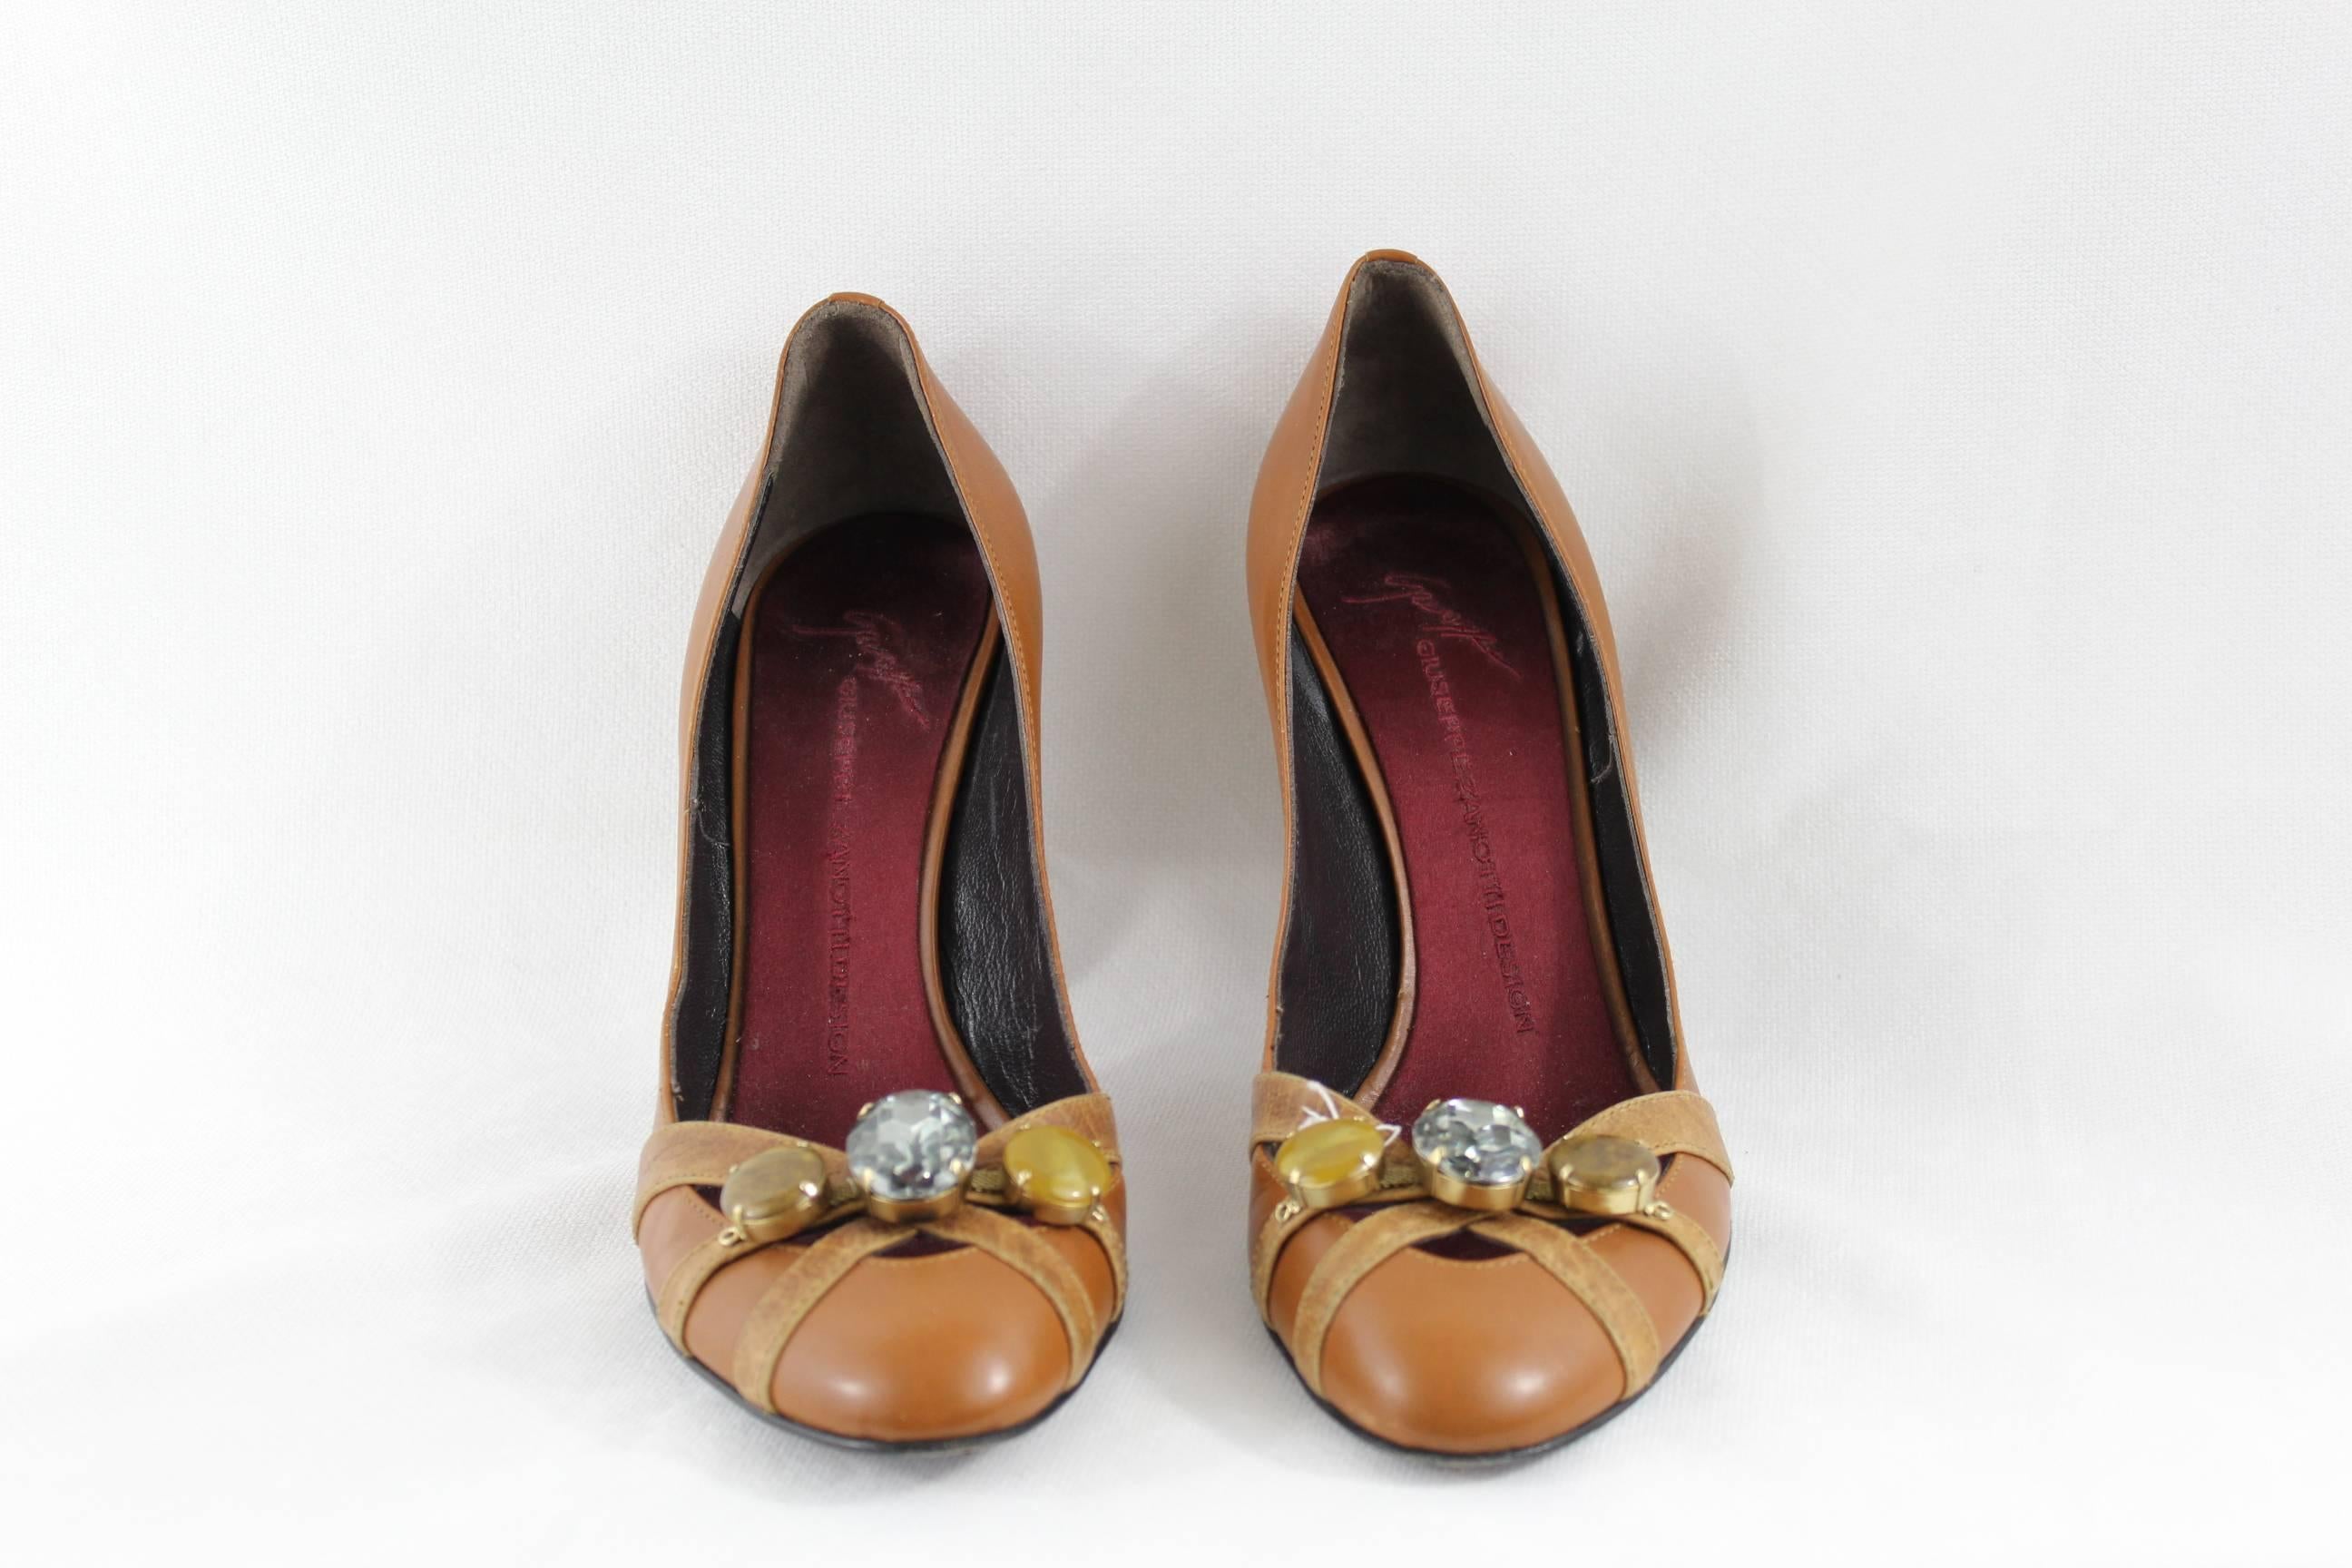 Nice pair of Giuseppe Zanotti hih heel shoes in brown leather.

Some small signs of wear.

3 really nice stones in the front.

Size EU 38 (US 6,5)